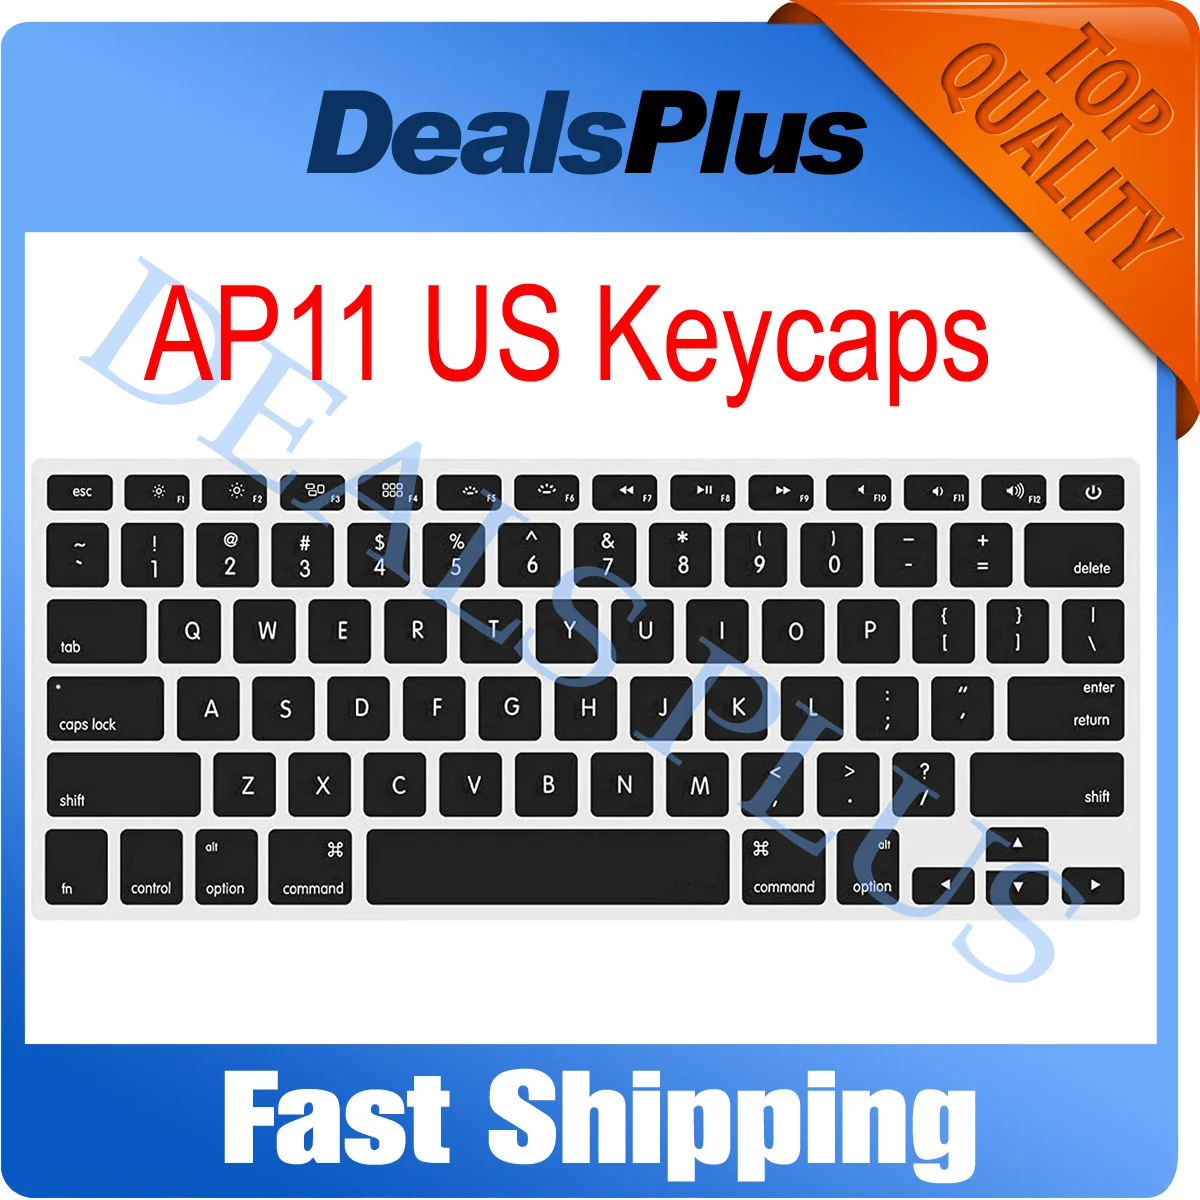 New AP11 US Keyboard Keycaps Set For Macbook Air A1369 A1466 Pro Retina A1398 A1425 A1502 2012 2013 2014 2015 Years